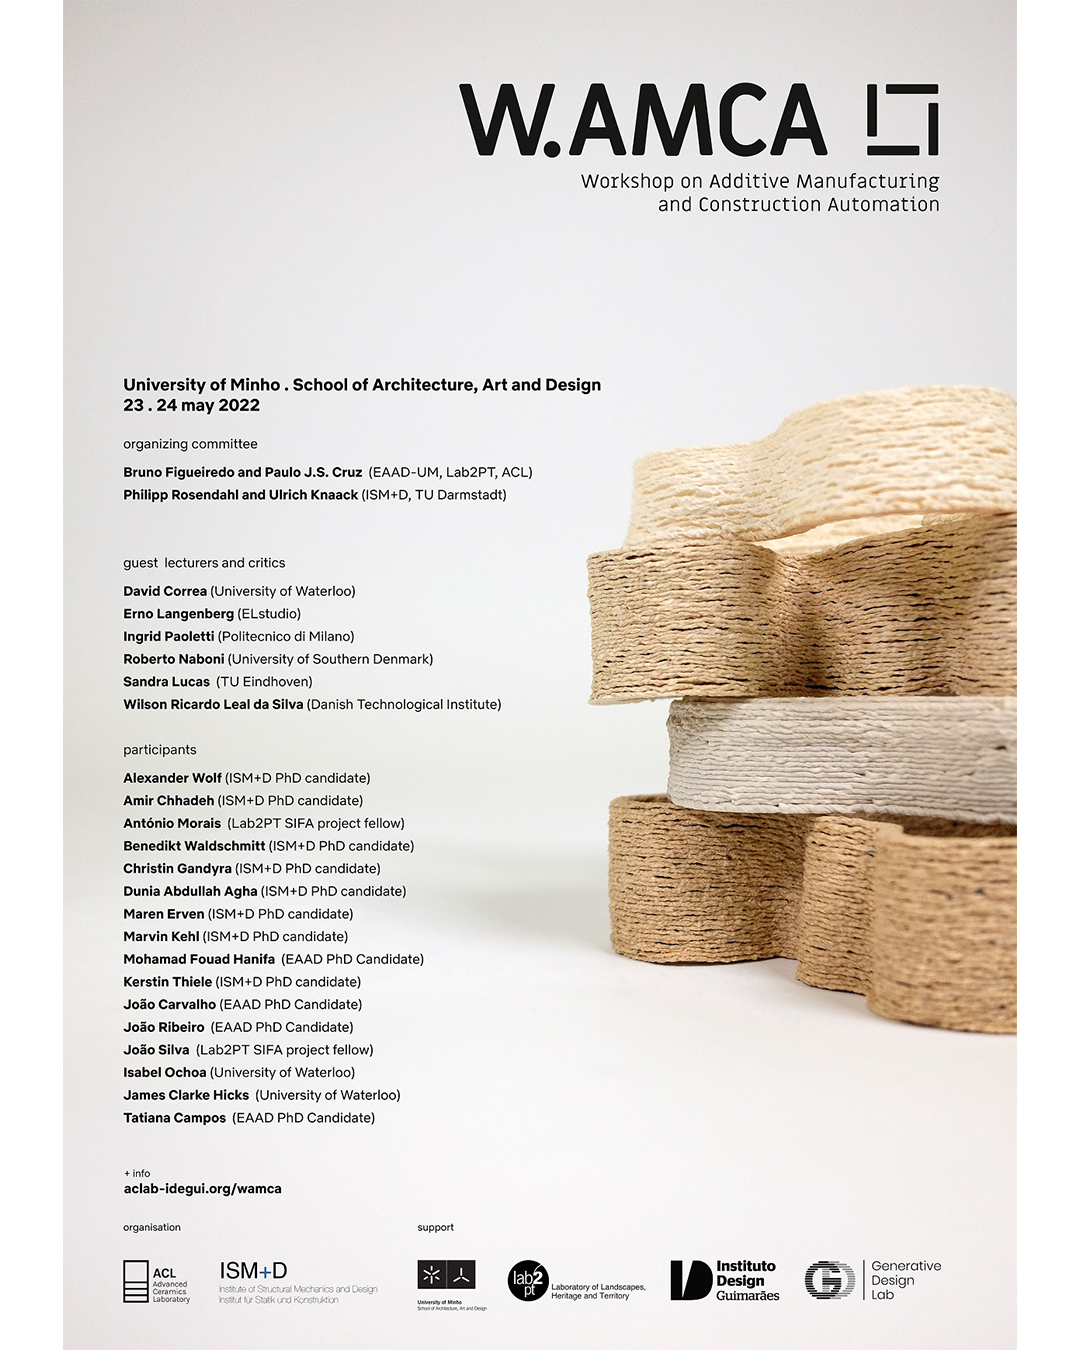 Workshop on Additive Manufacturing and Construction Automation - W.AMCA image